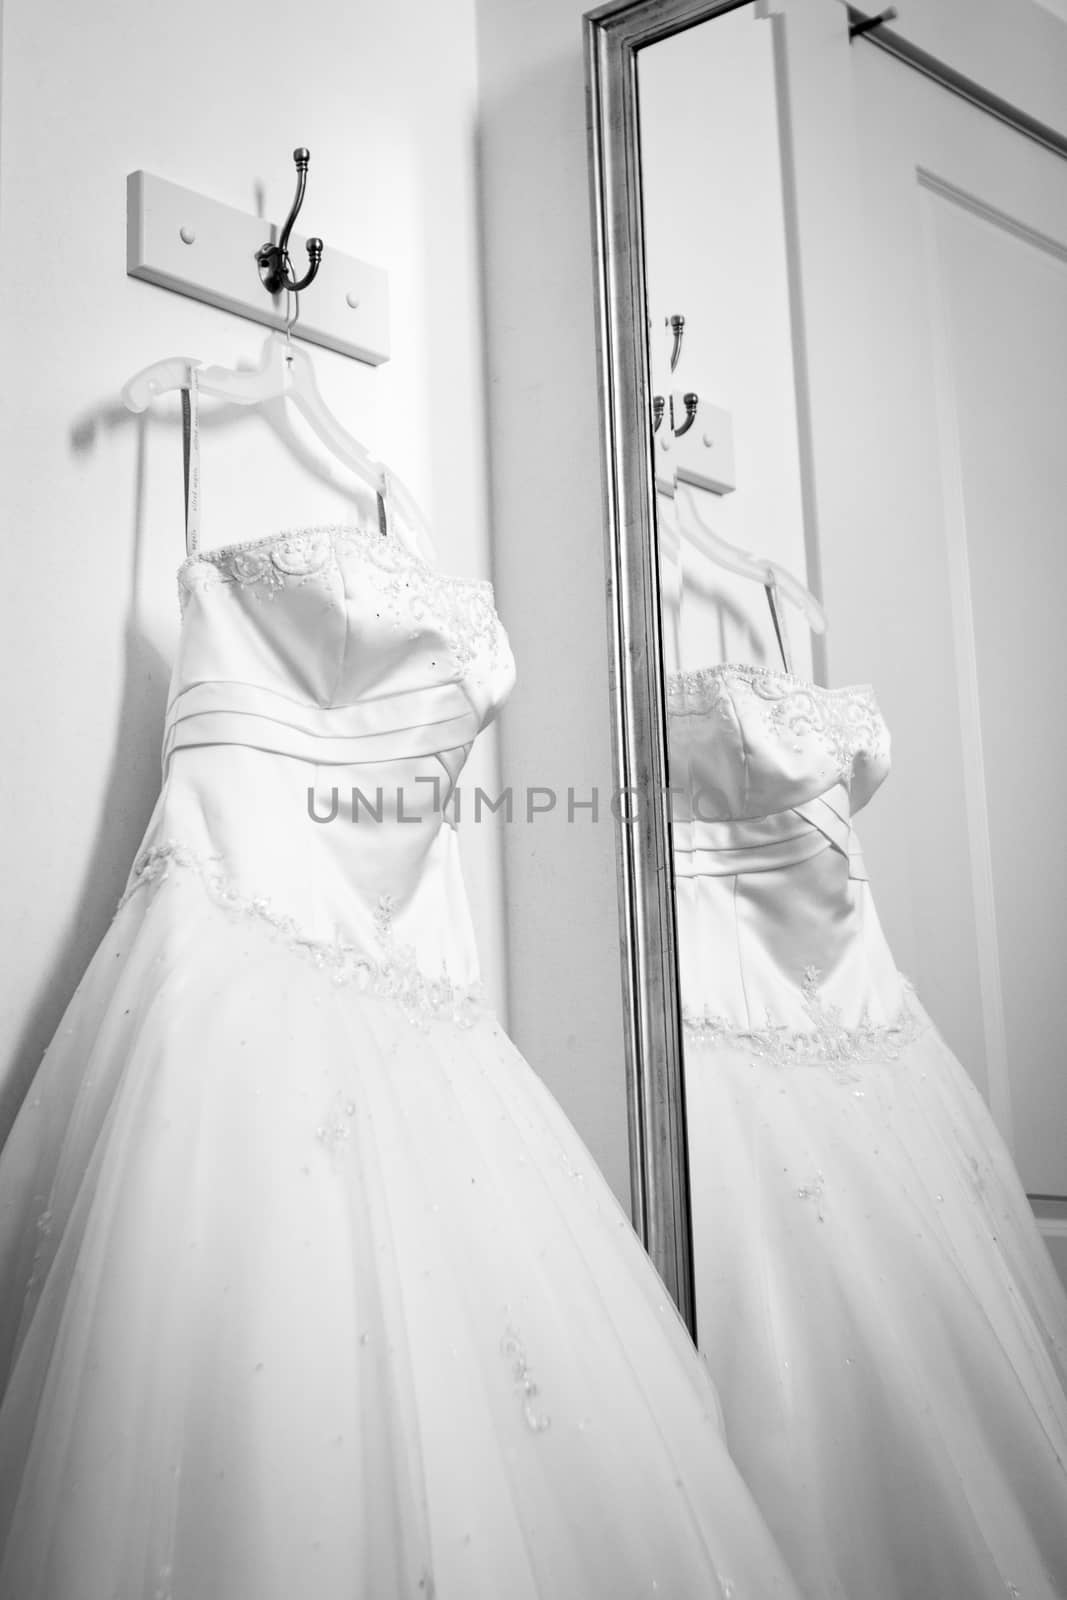 A close up of a classic wedding dress hanging up next to a mirror. 